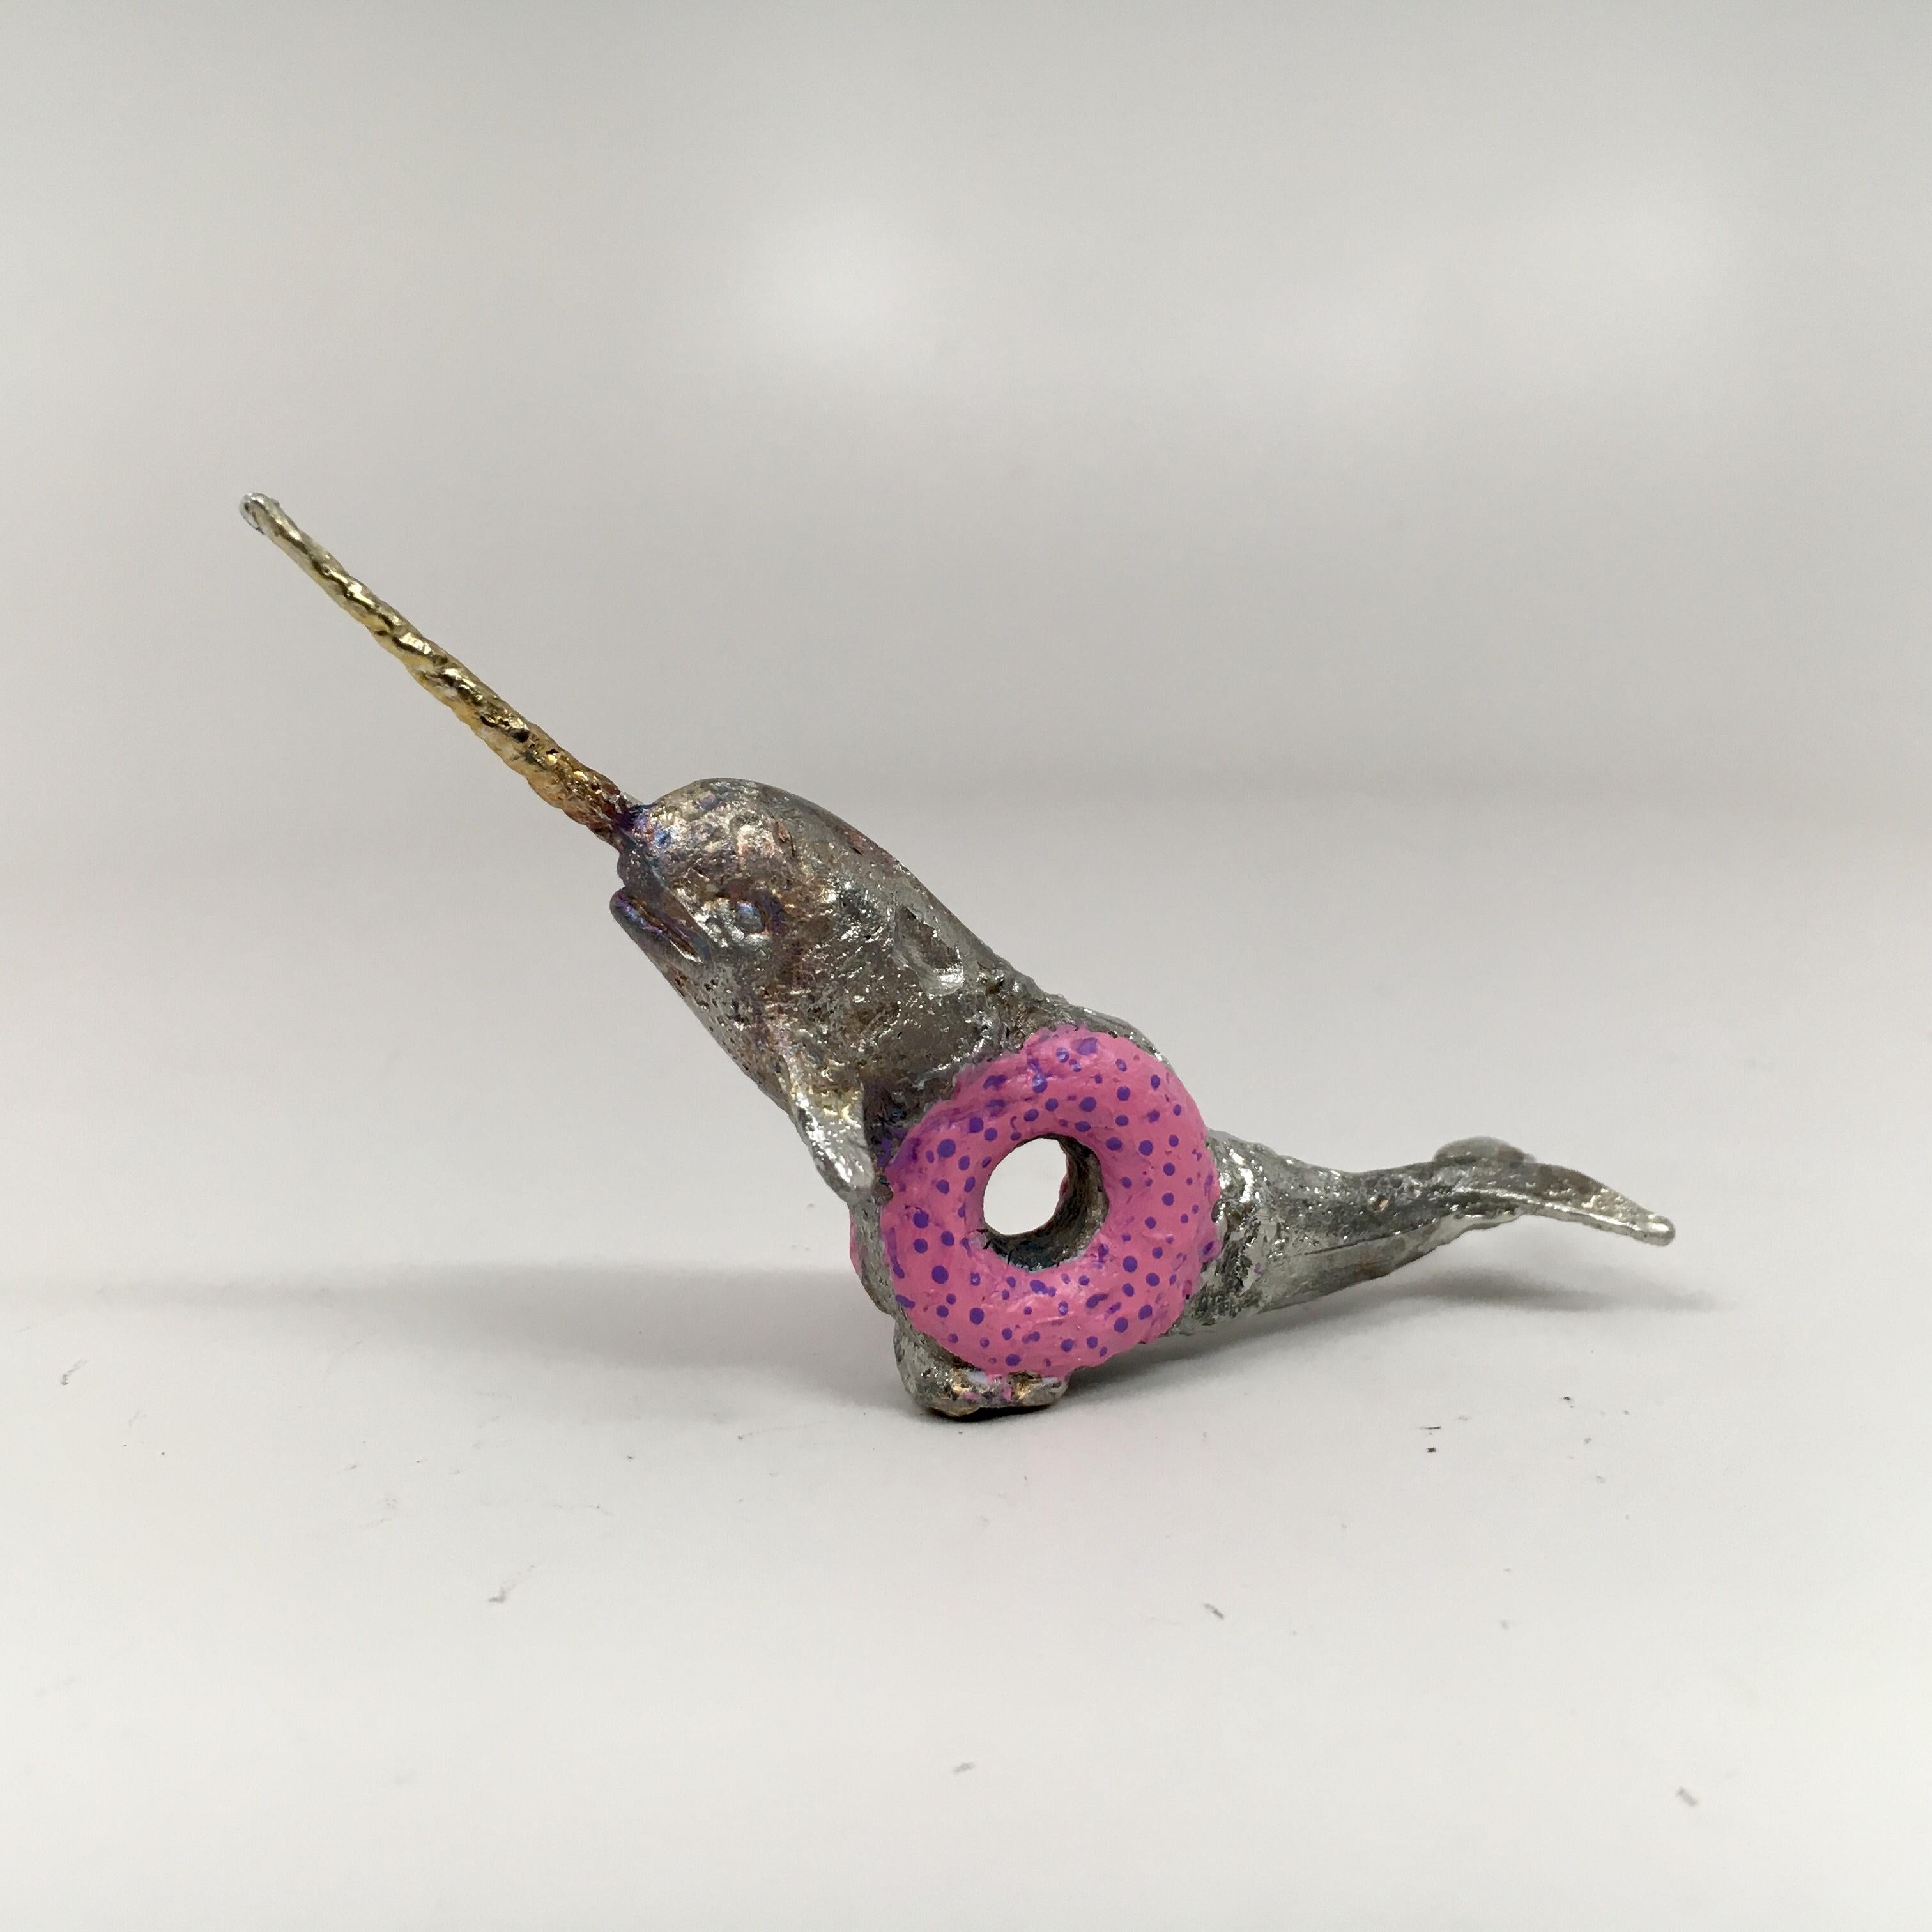 Joshua Goode Figurative Sculpture - Pewter Sculpture: ''The Donut Narwhal'